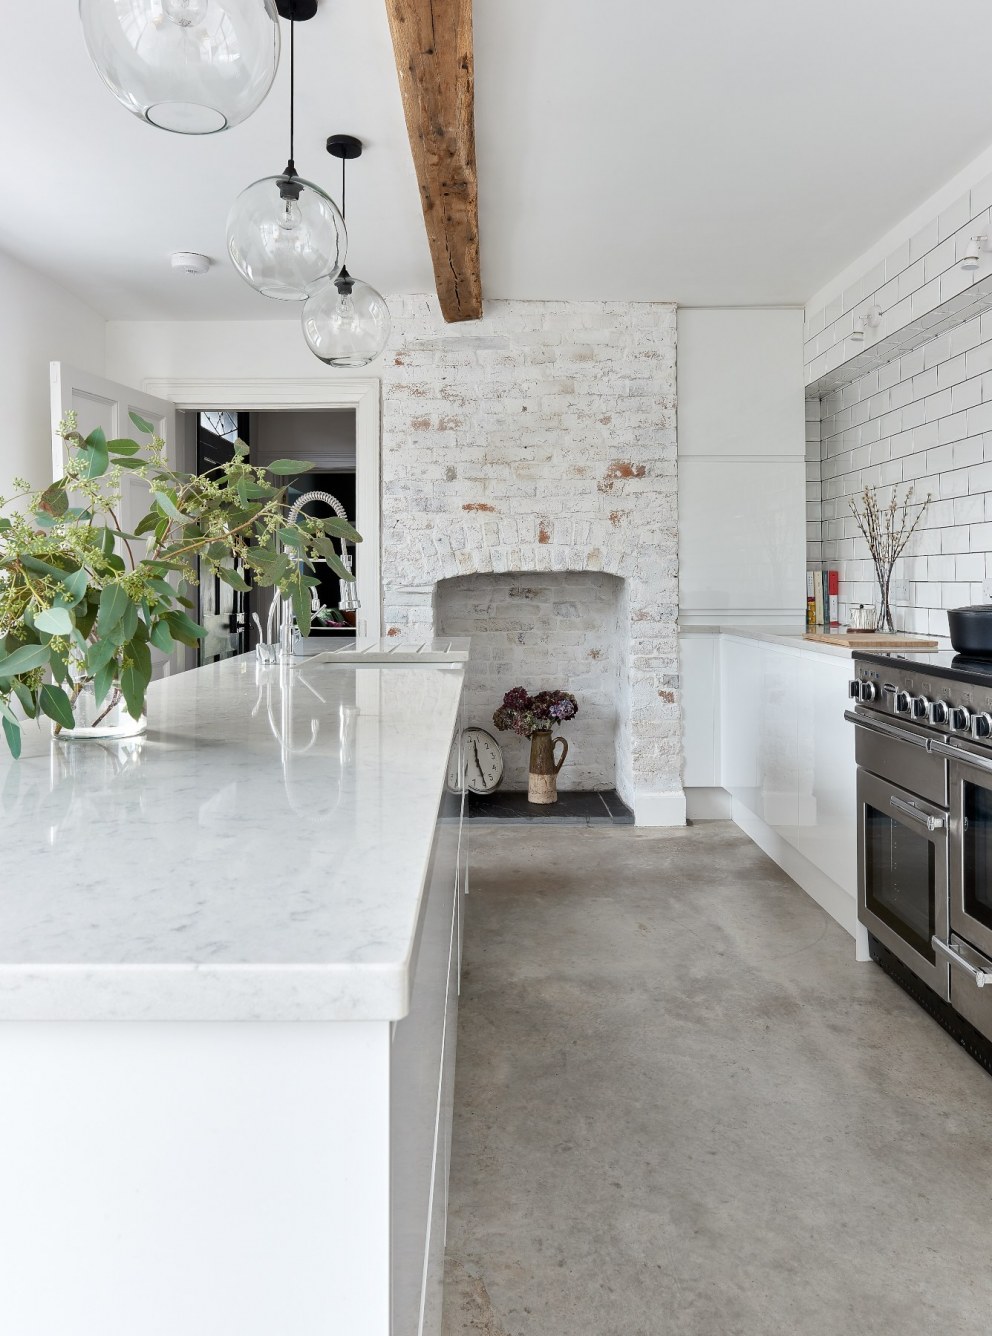 Welsh Farmhouse renovation | Modern Scandinavian Kitchen in a extension to a Victorian cottage | Interior Designers